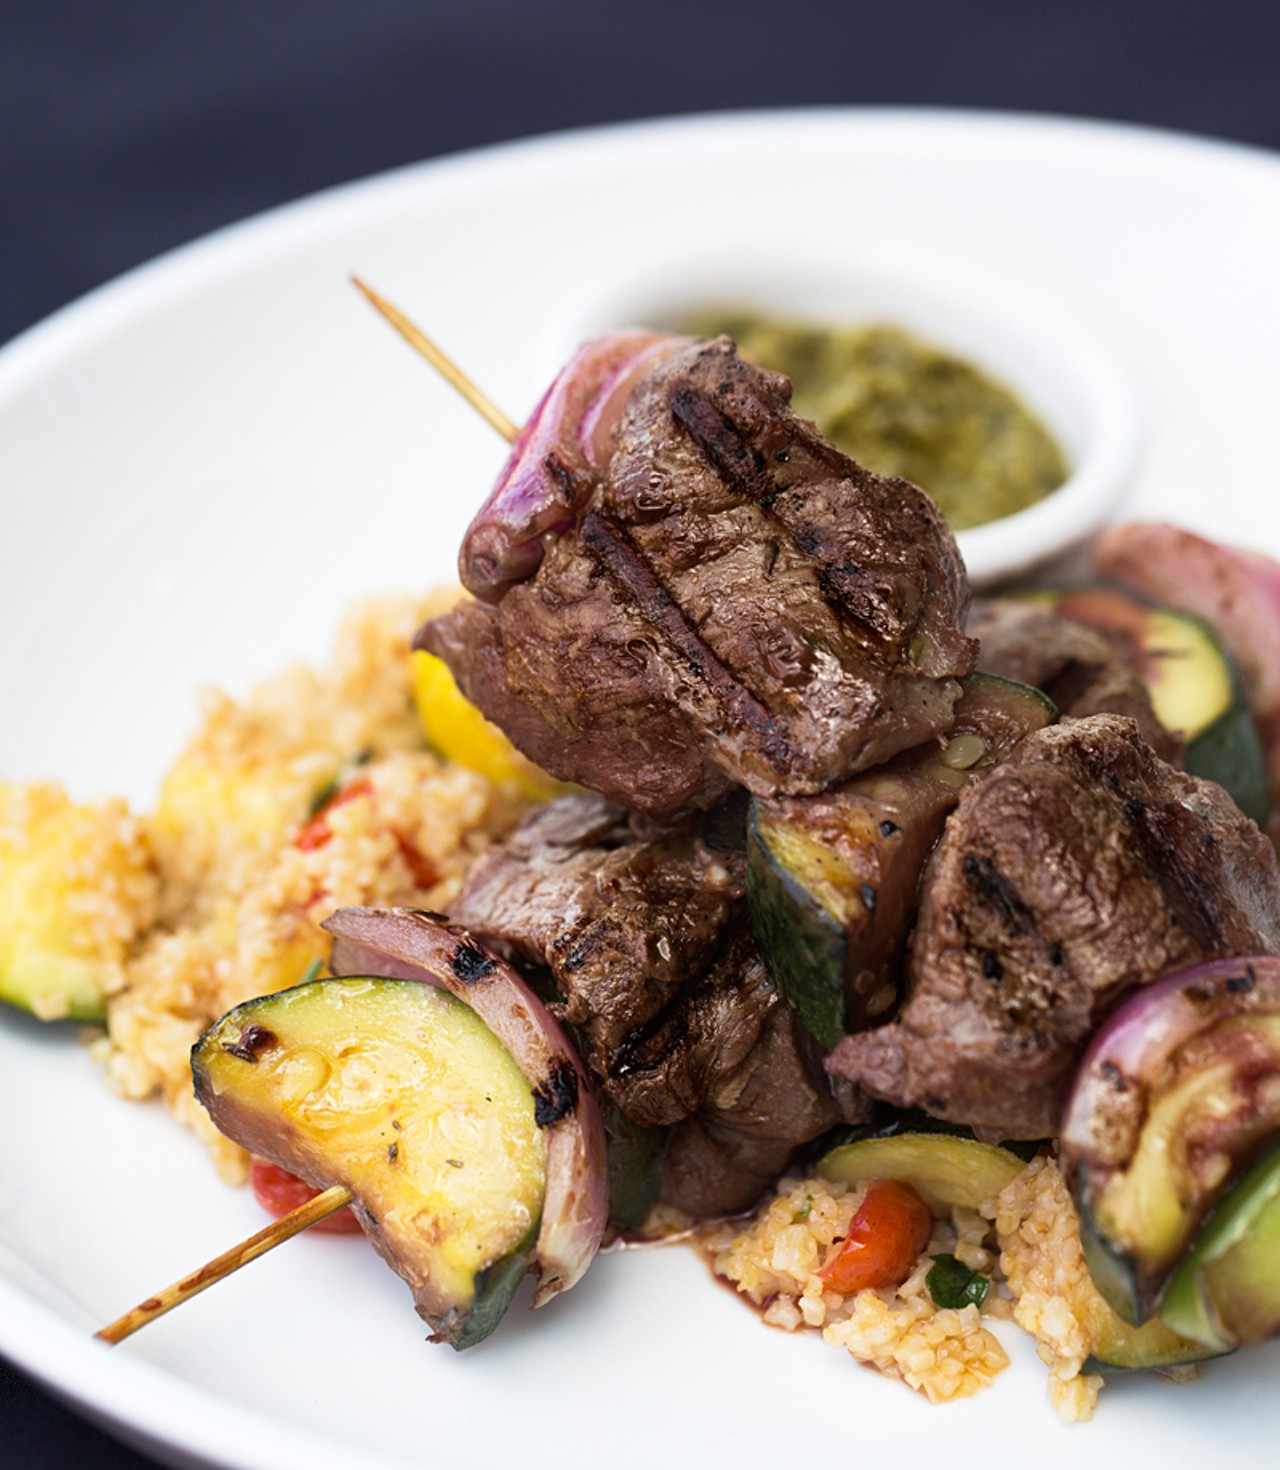 Beef tenderloin kabobs are grilled eight-ounce skewers with squash, zucchini, onions, peppers, warm tabouleh salad and chimichurri sauce.